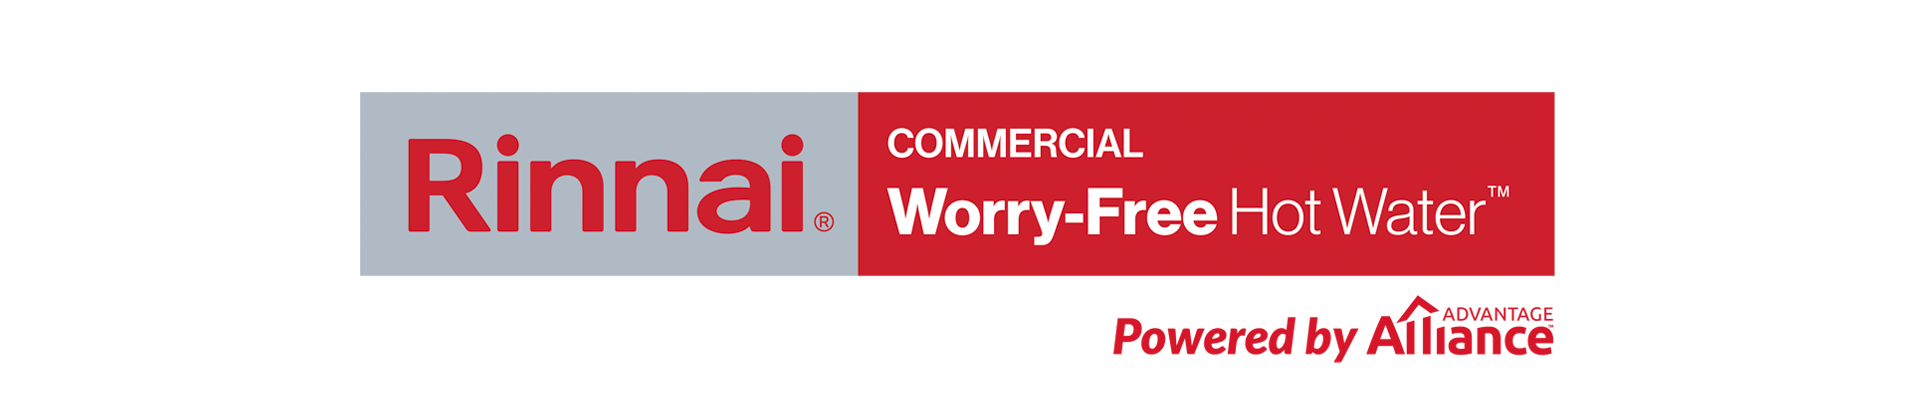 Commercial Worry-Free Hot Water Leasing Logo Hero